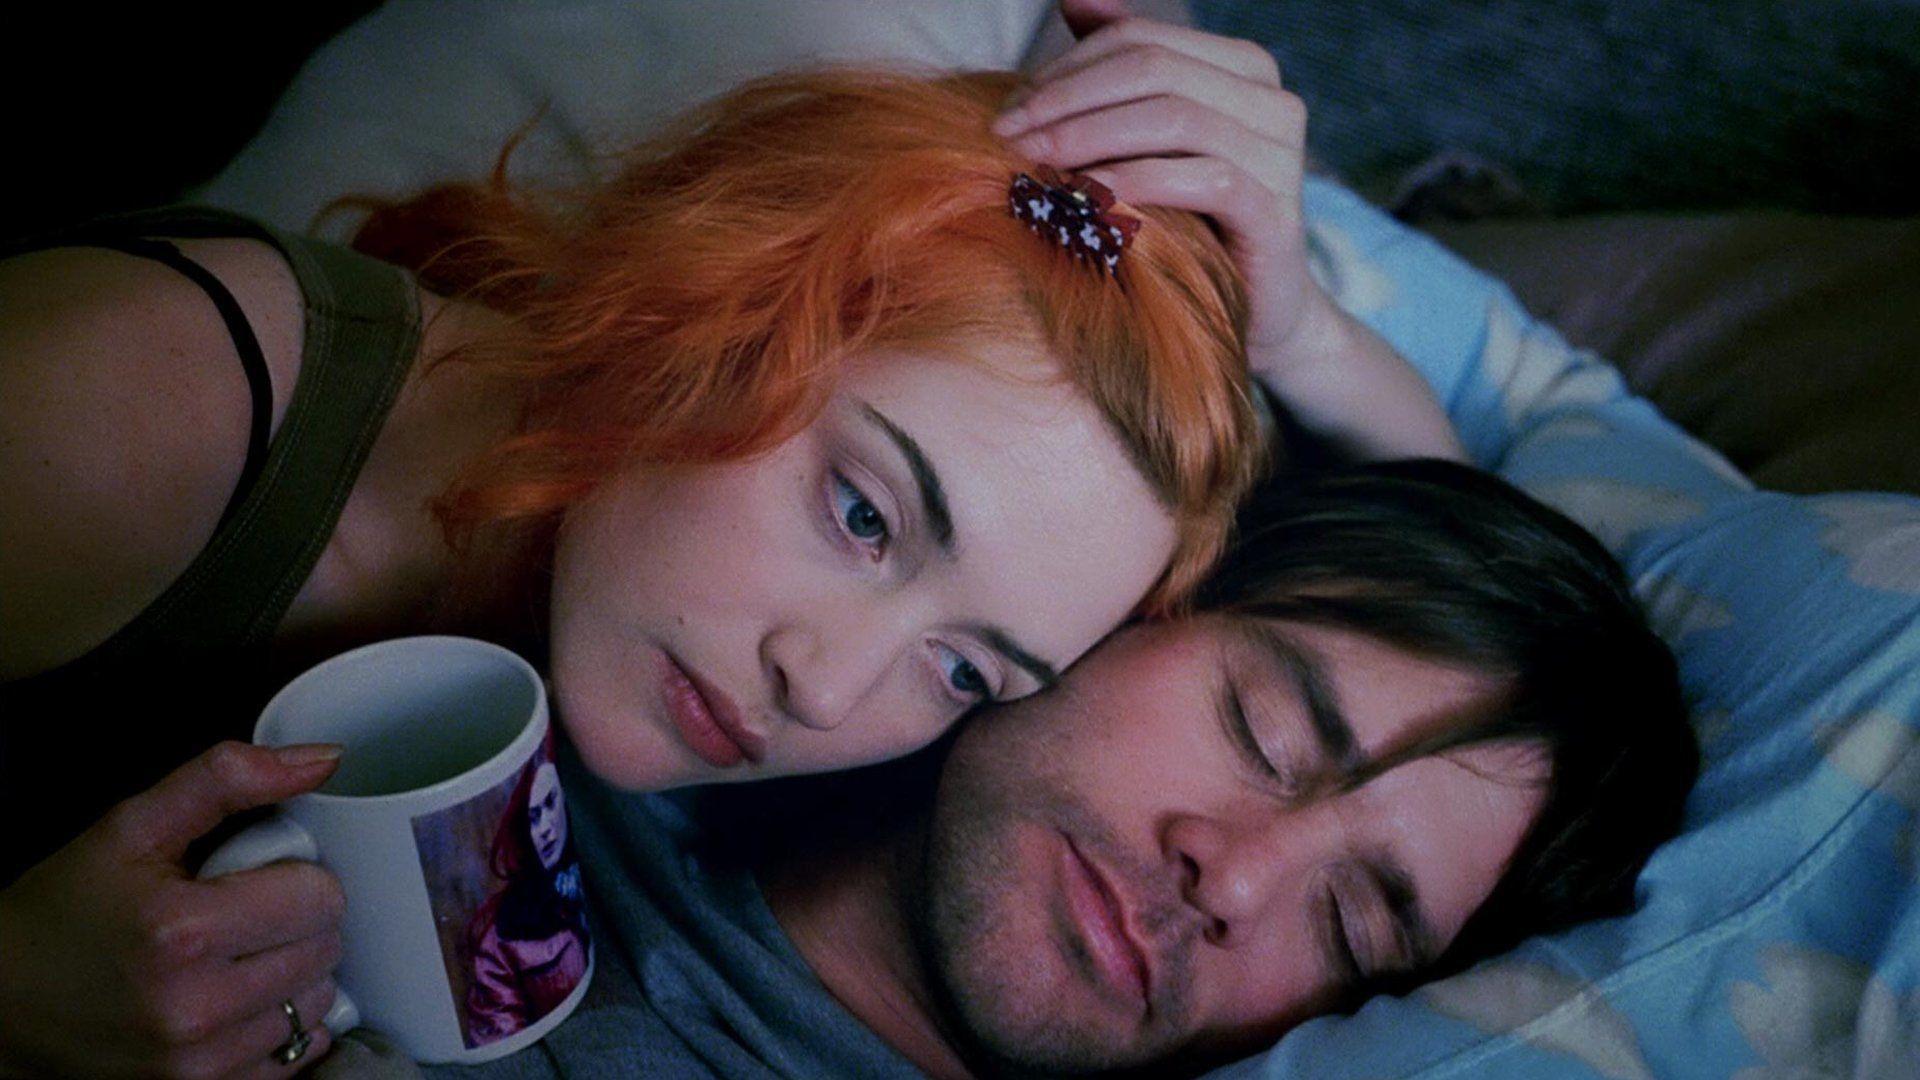 How Editing Shapes Story in 'Eternal Sunshine of the Spotless Mind'